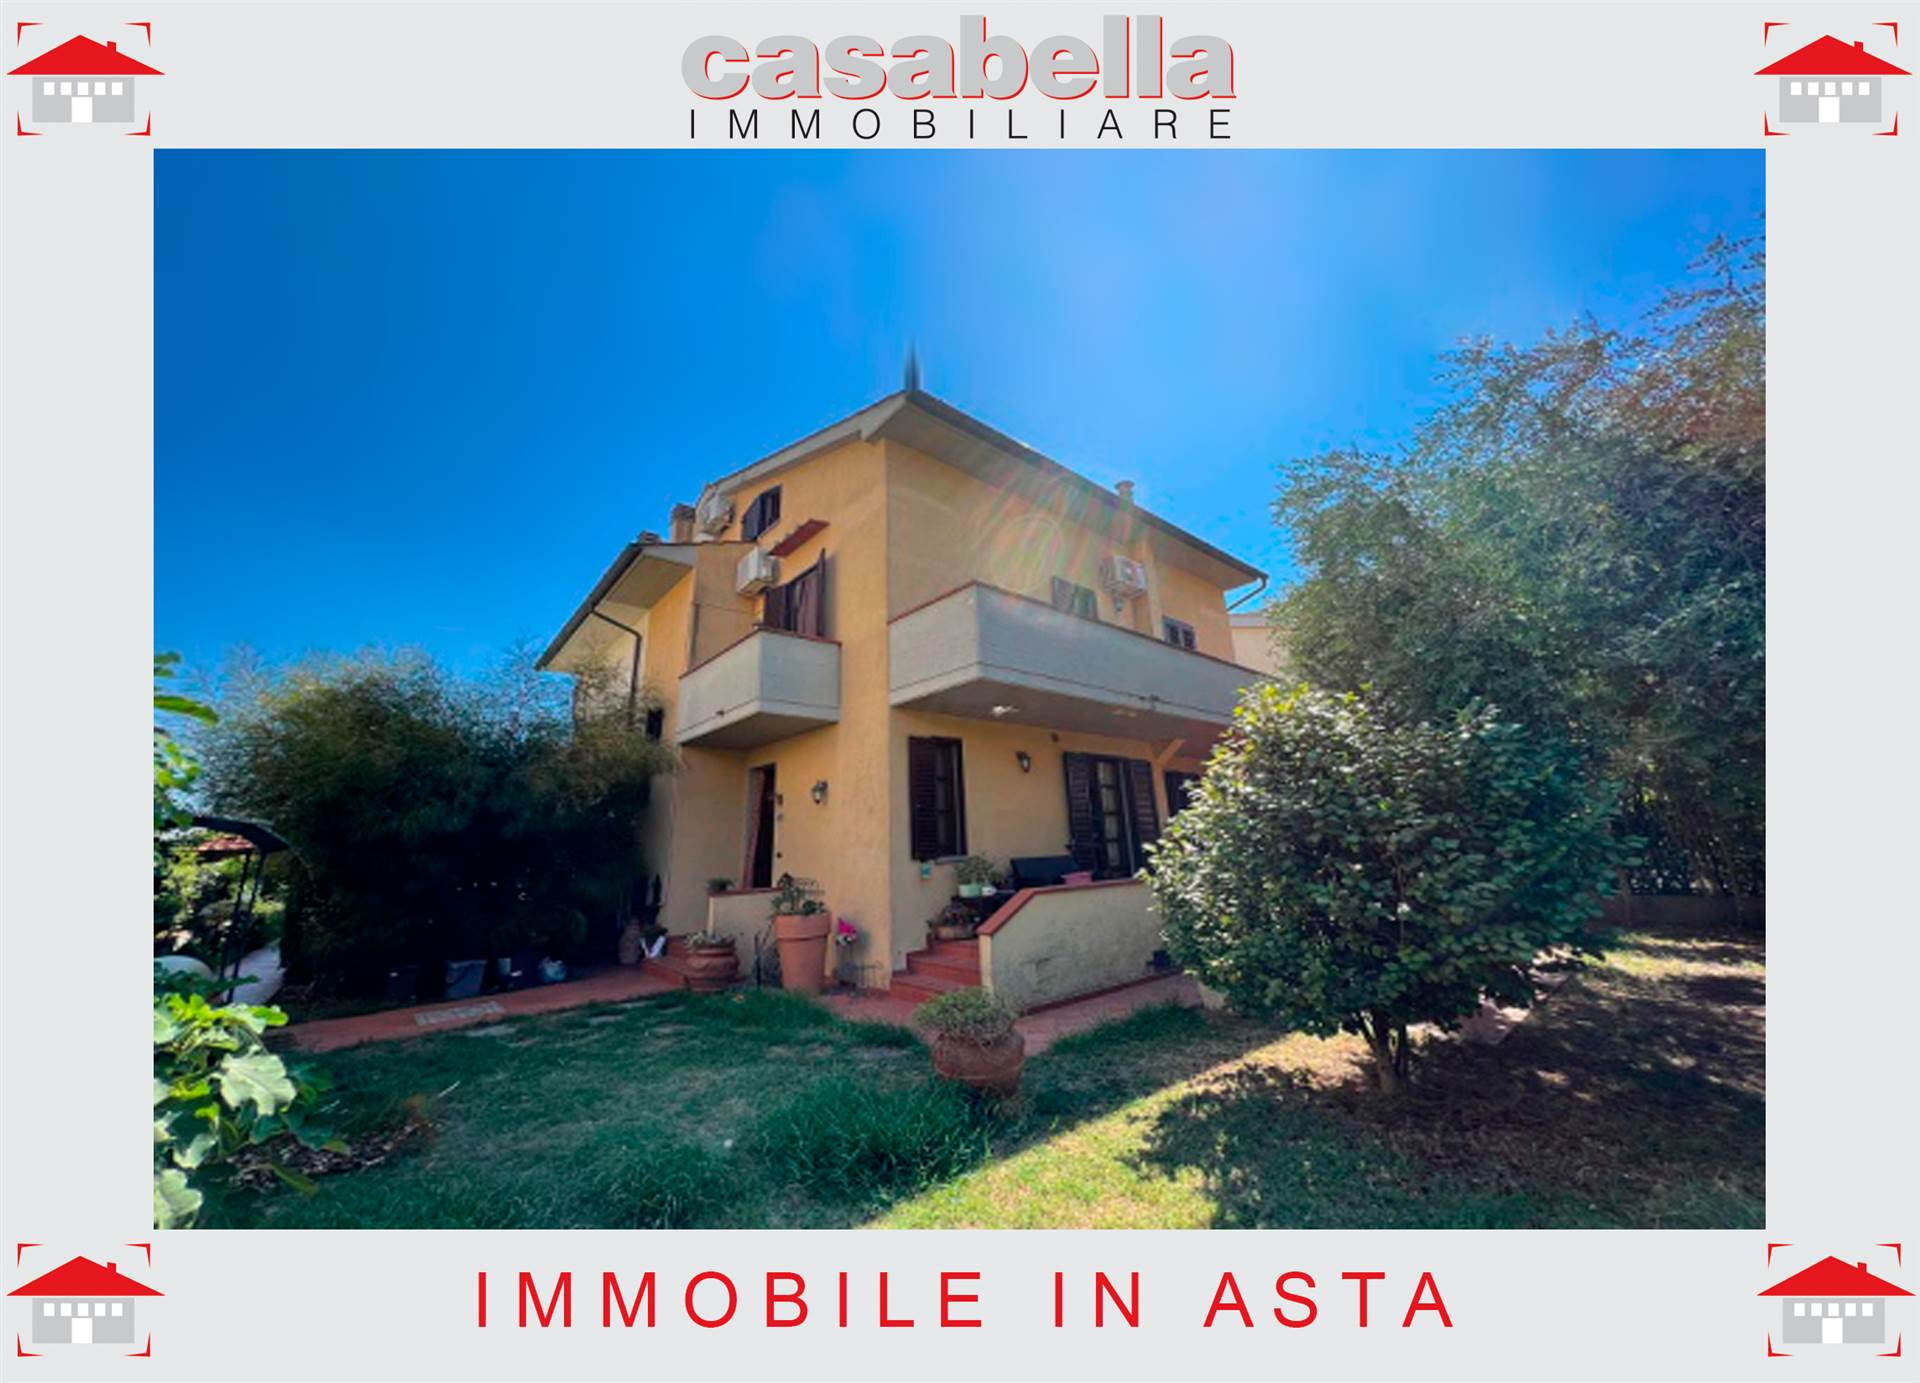 LE BADIE, PRATO, Cottage for sale of 172 Sq. mt., Excellent Condition, Heating Individual heating system, Energetic class: G, placed at Basement on 3,